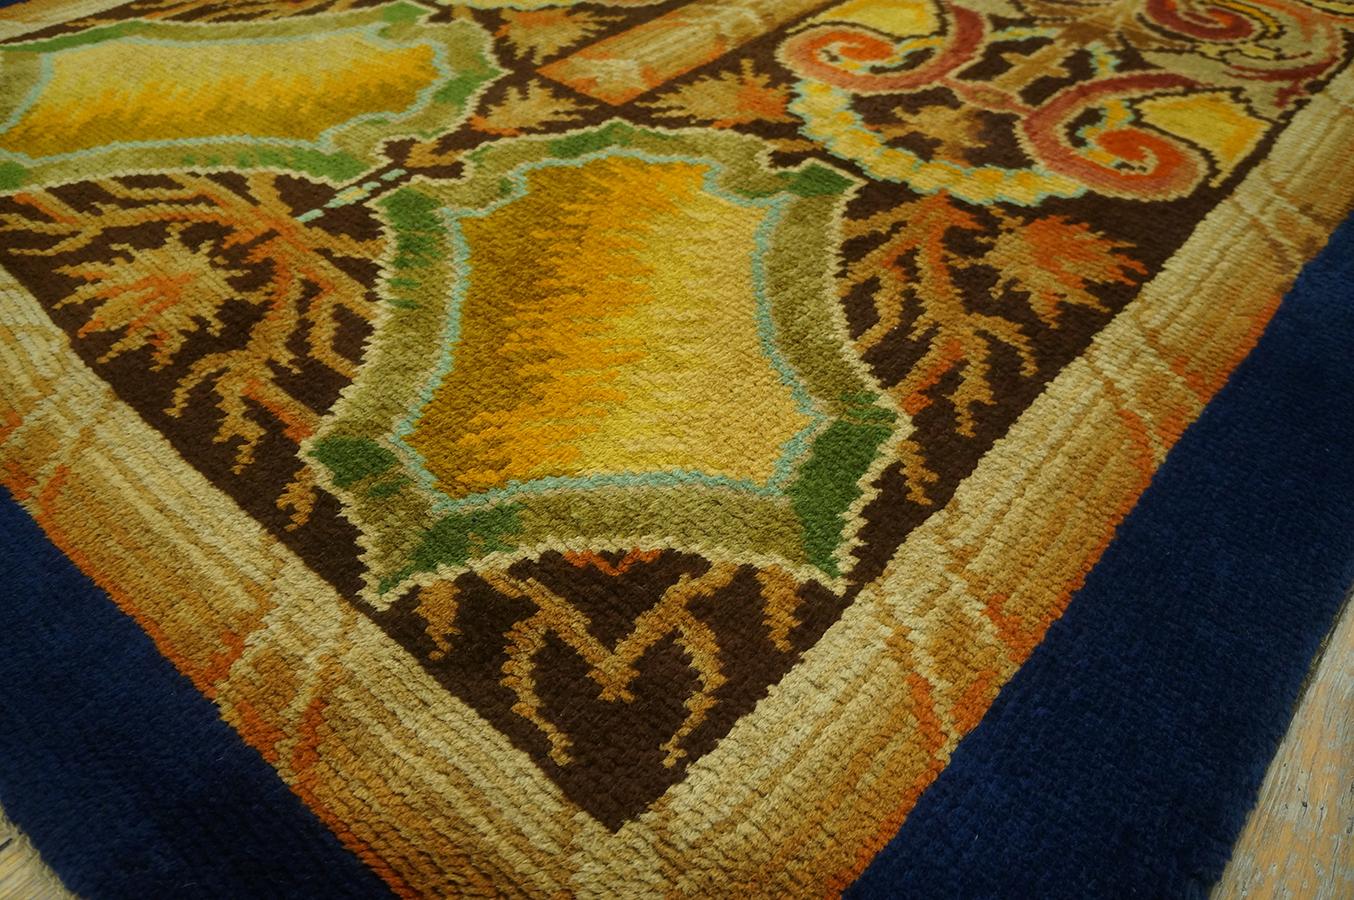 Early 20th Century English Axminster Carpet ( 4'9